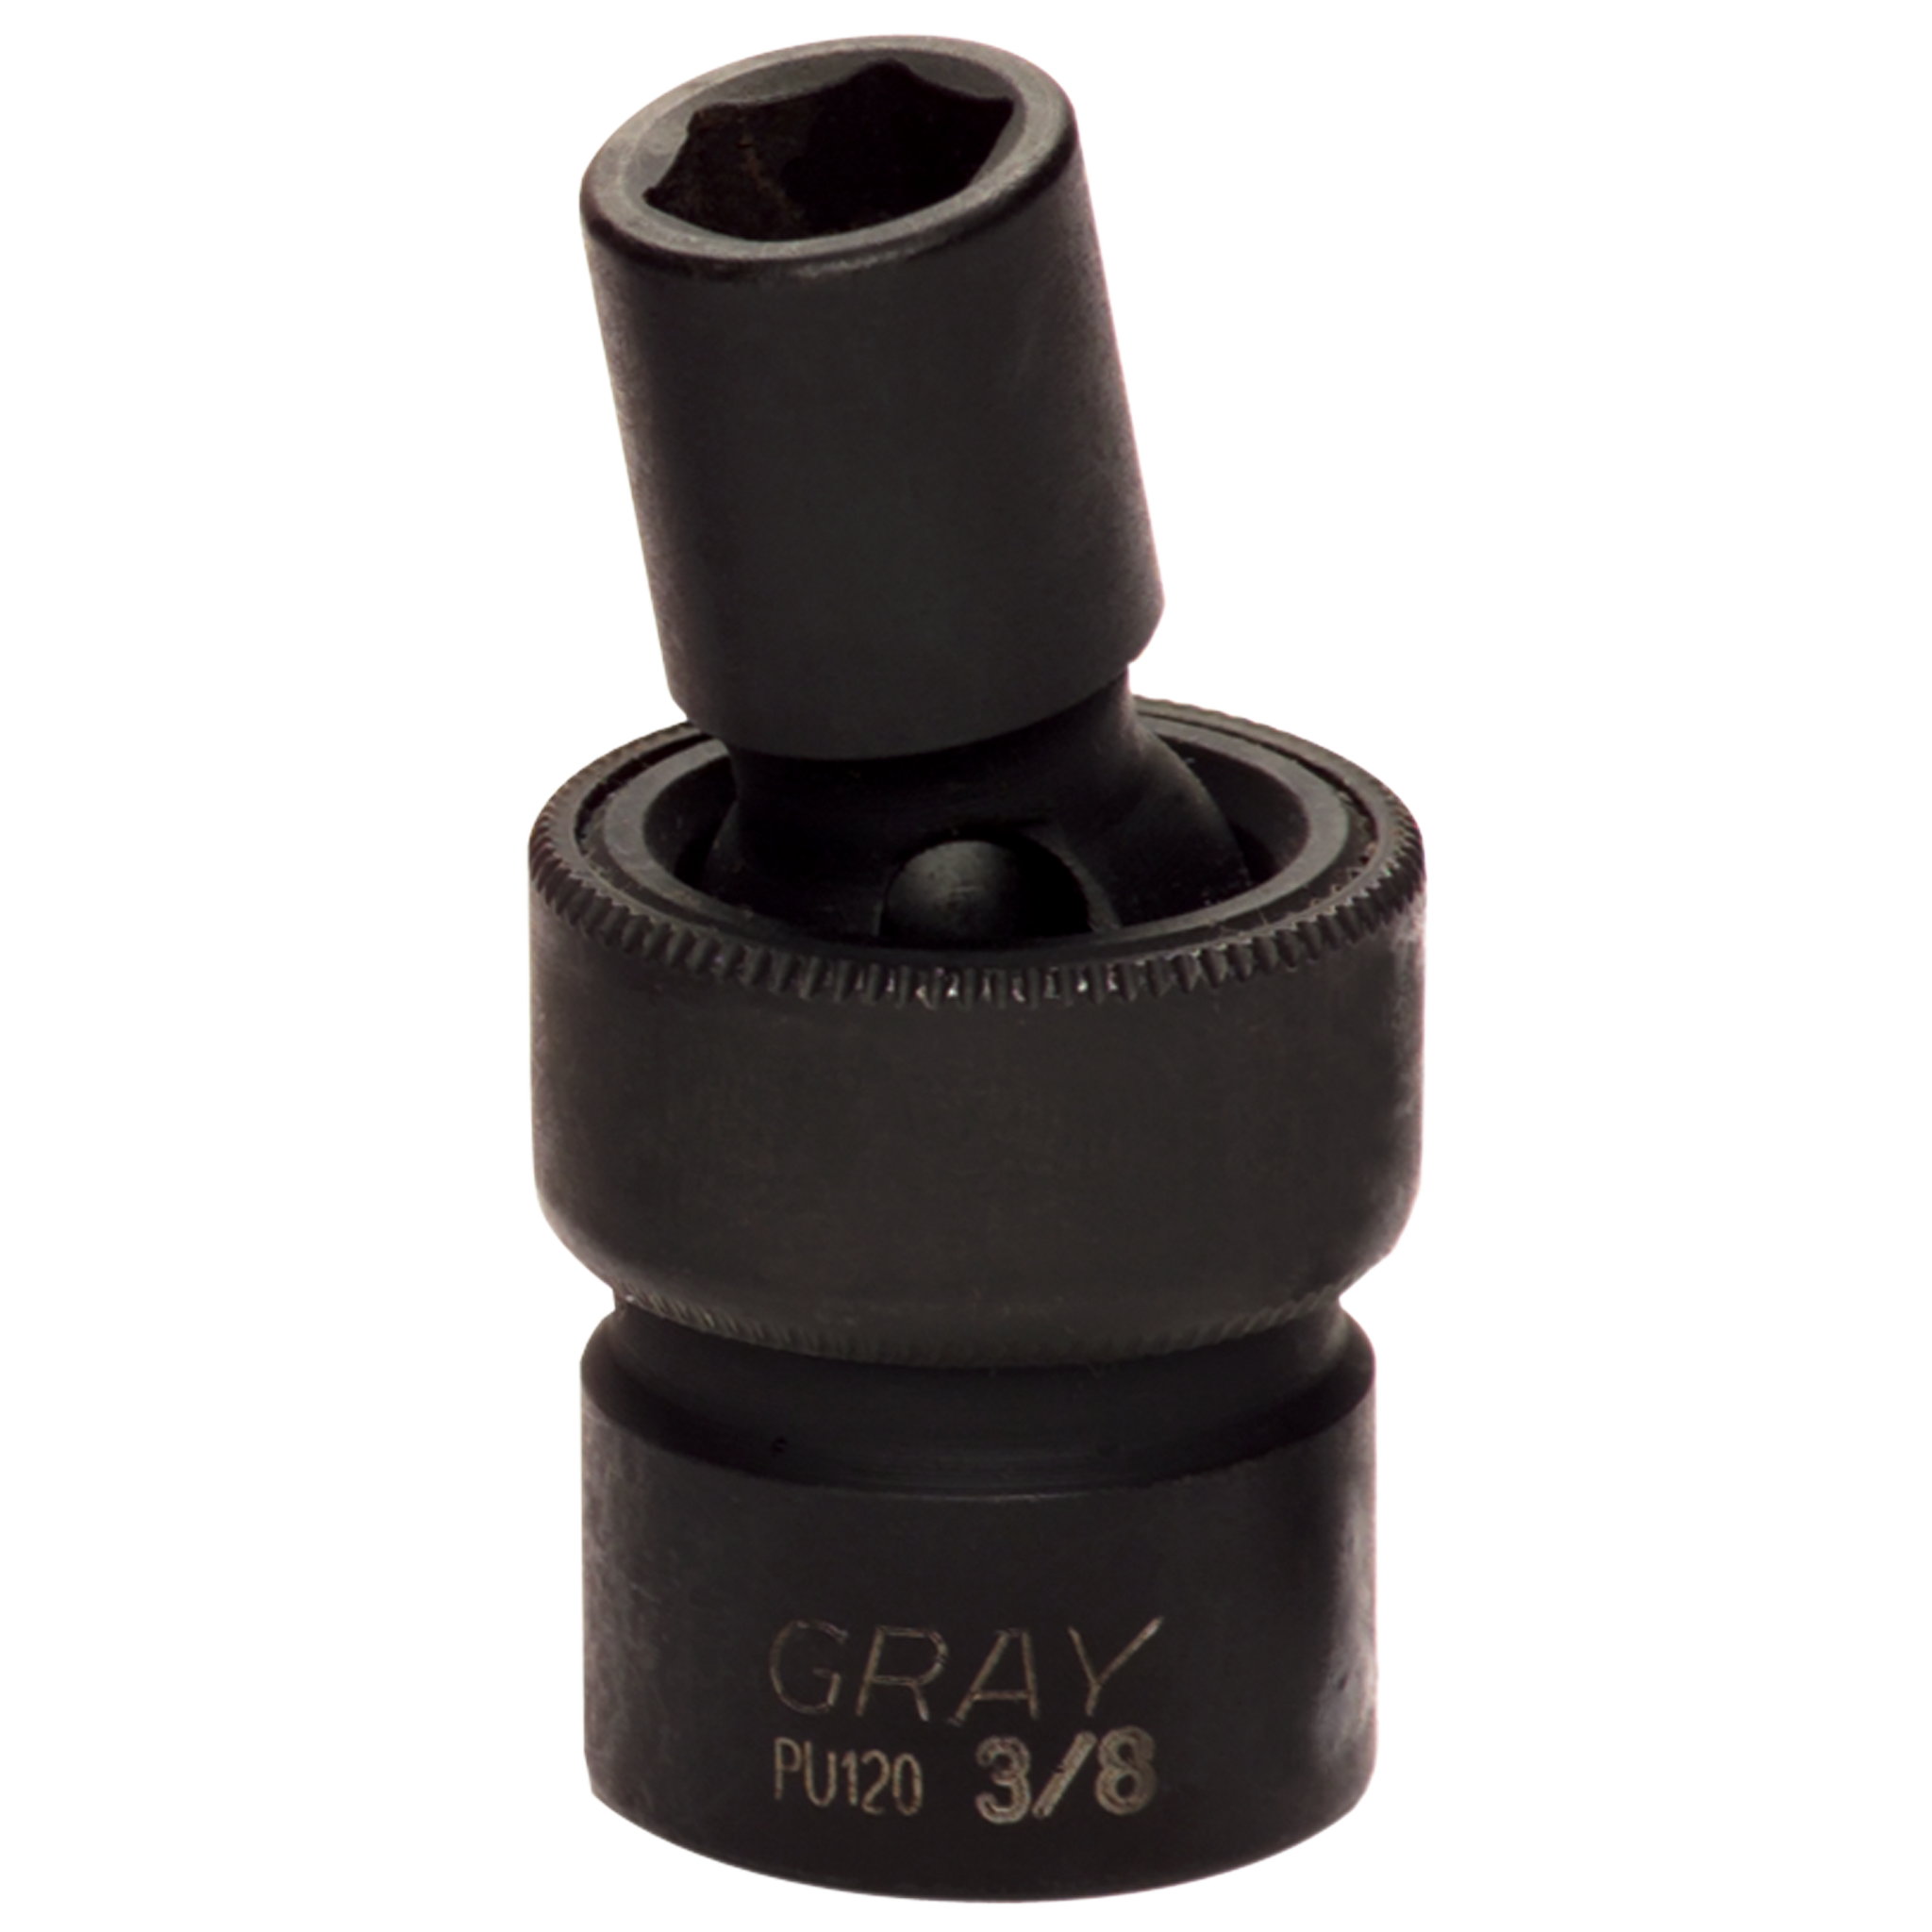 3/8" Drive Universal Joint Sockets - Impact Black Industrial Finish